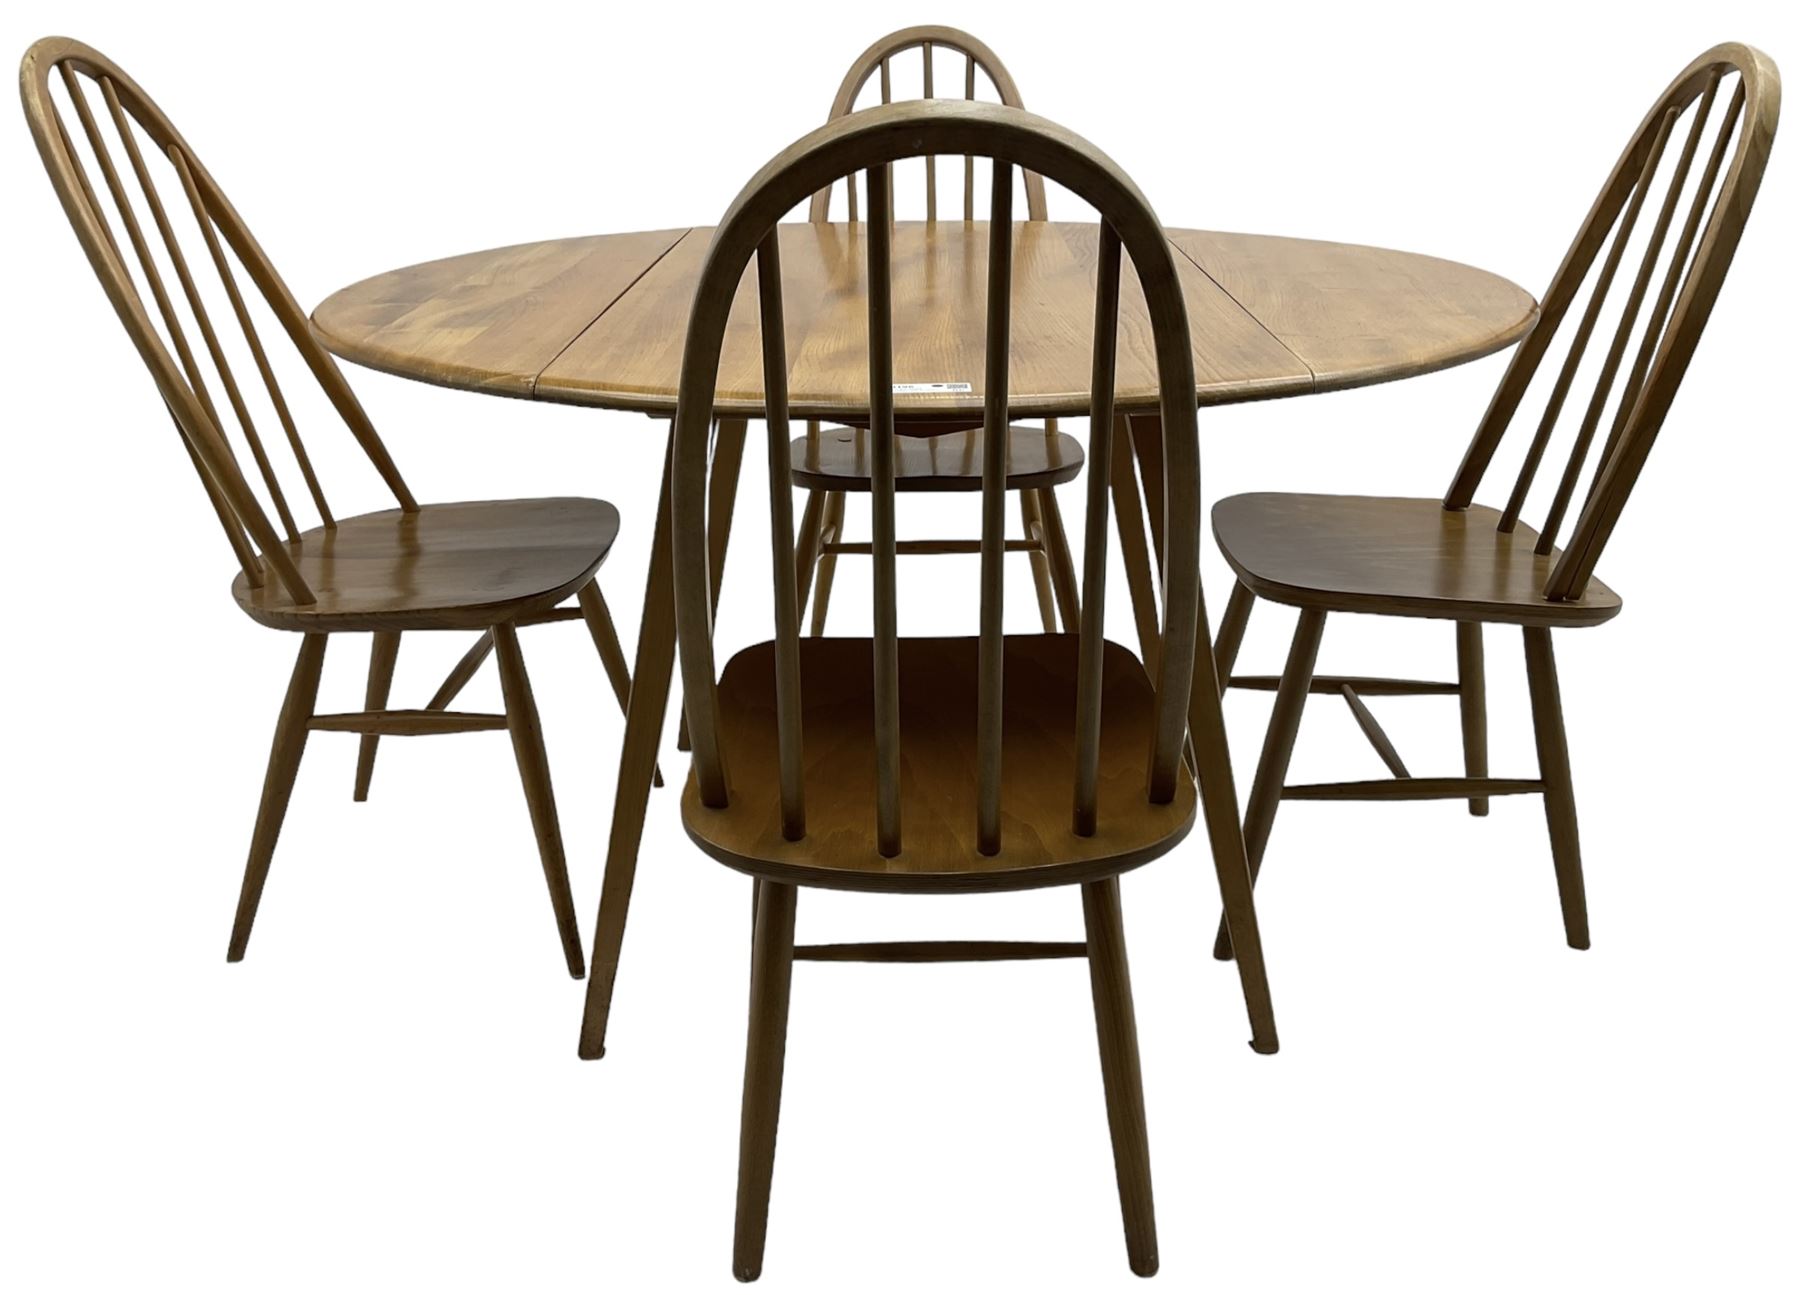 Ercol - elm and beech dining table - Image 3 of 7